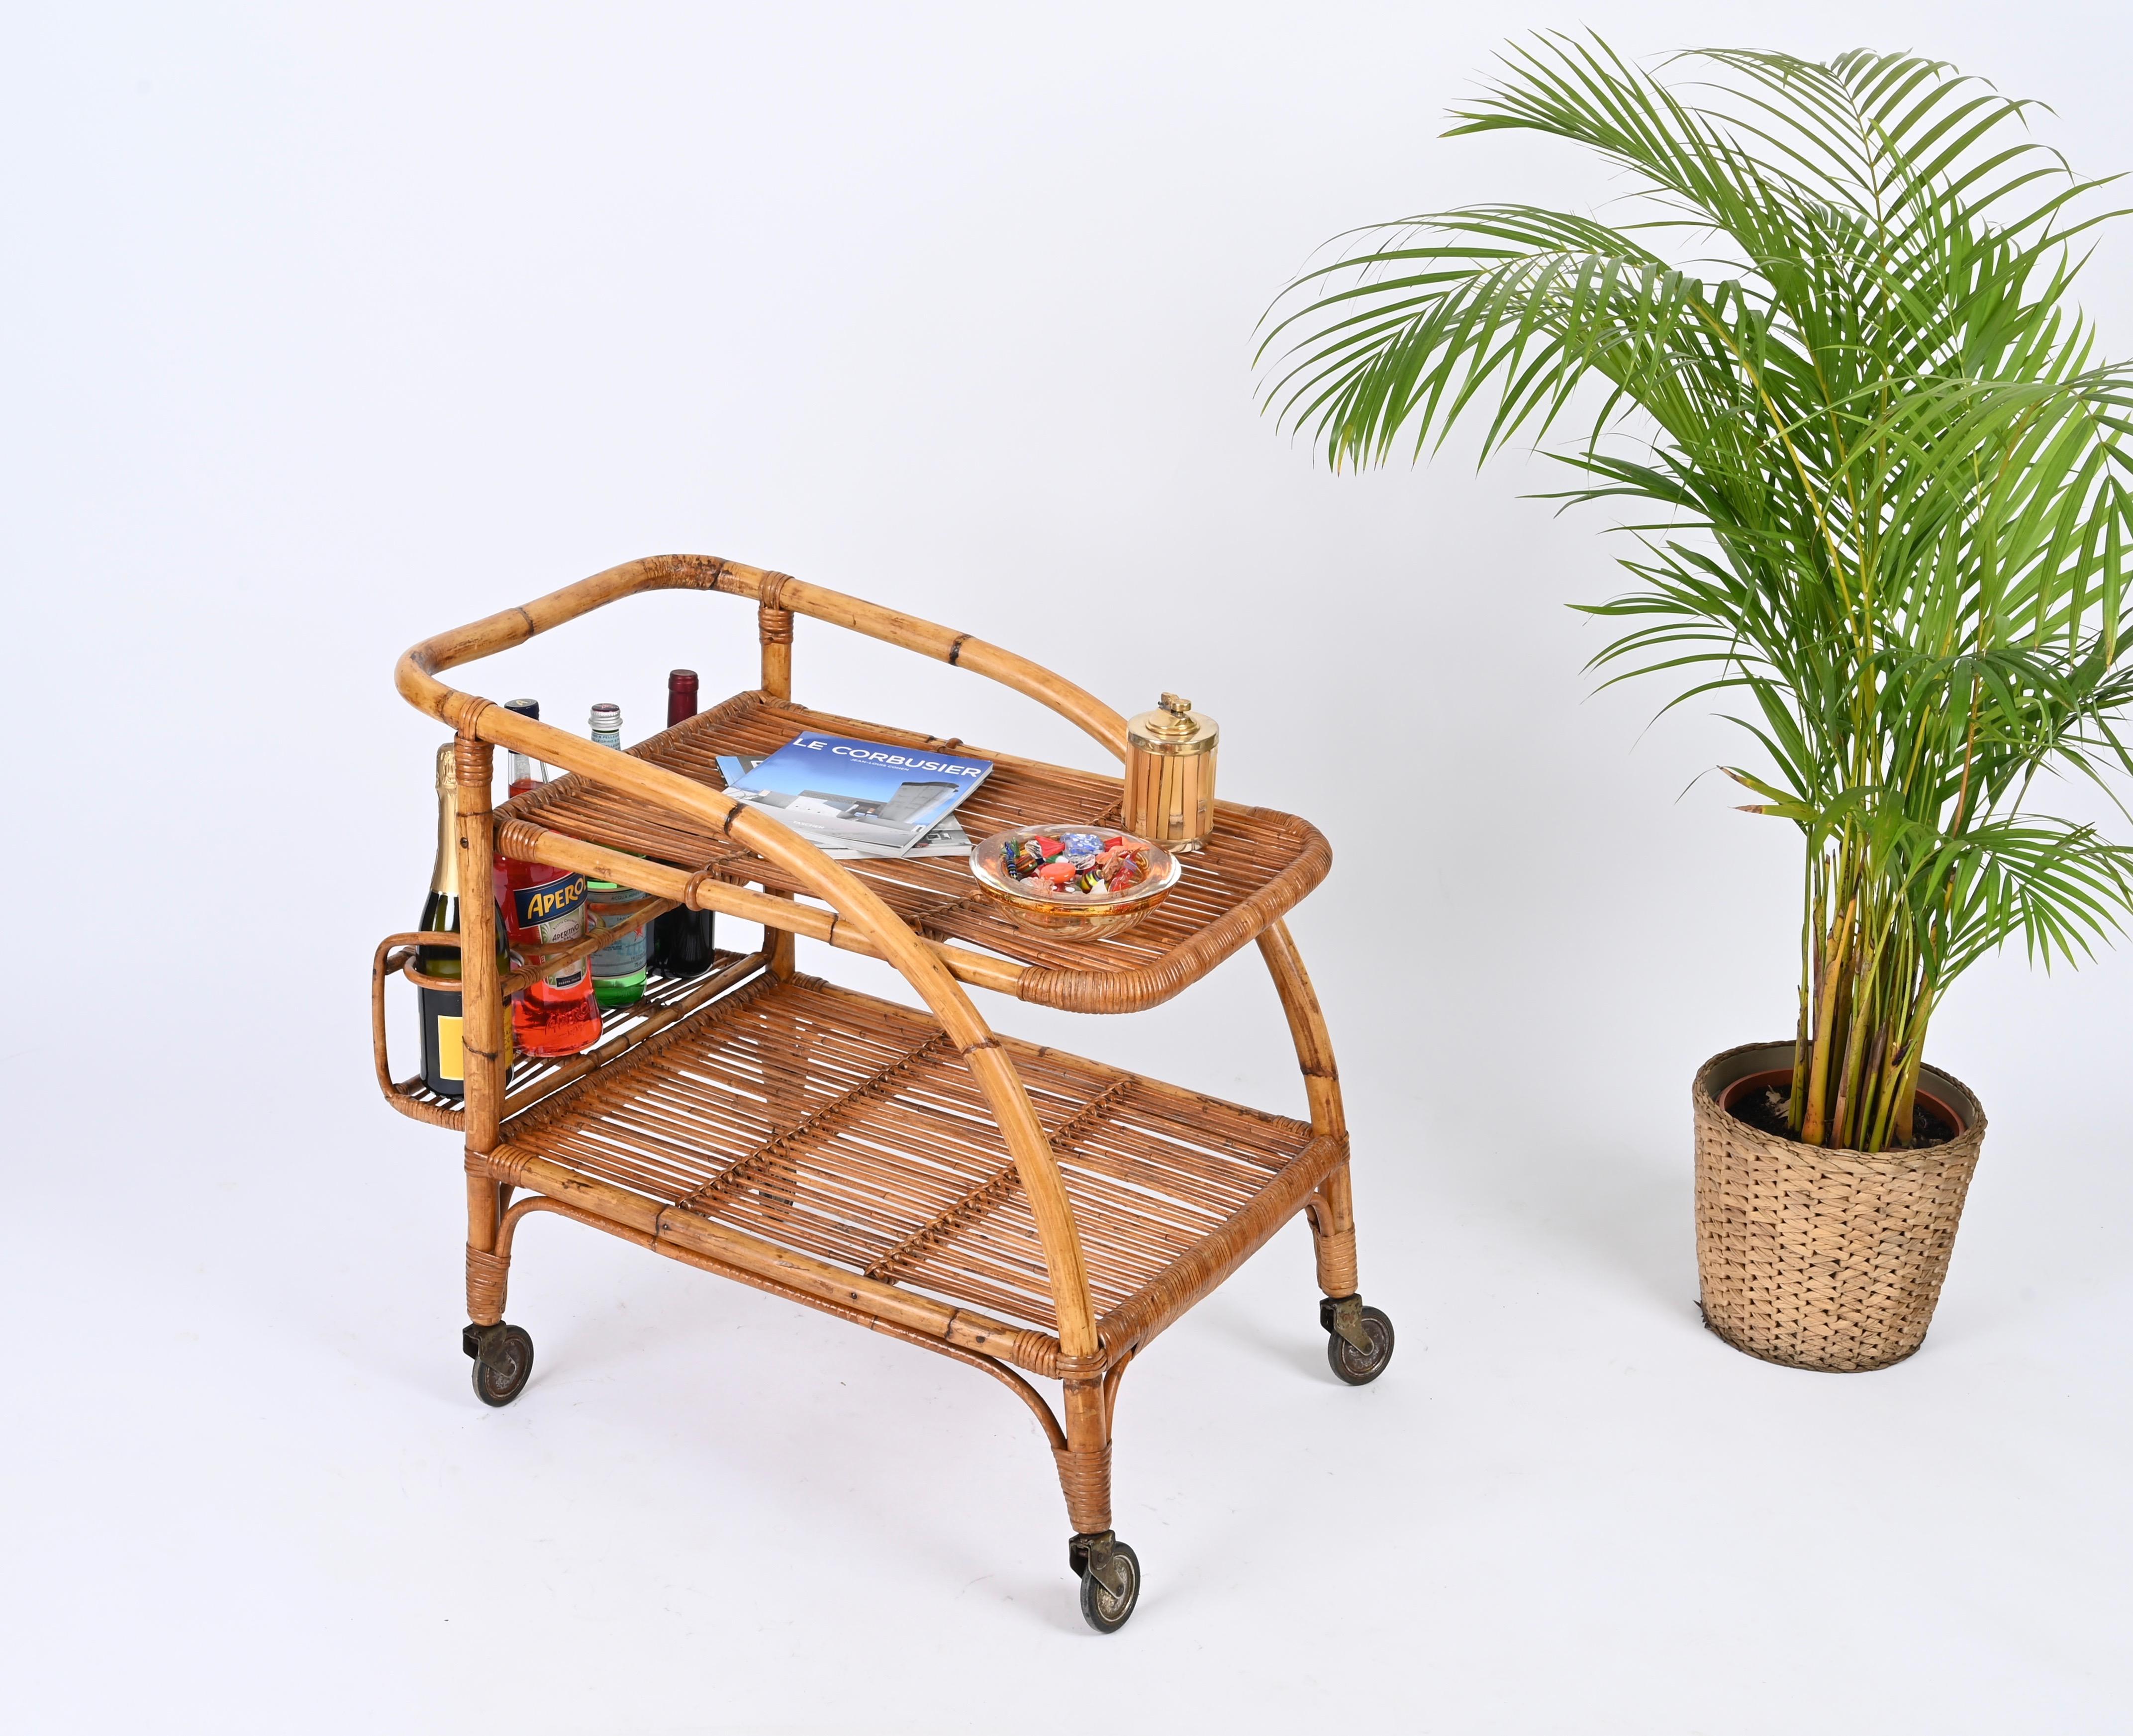 Magnificent Mid-Century organic serving bar cart with bottle holder fully made in bamboo, rattan and hand-woven wicker. This lovely French Riviera style cart was designed in Italy during the 1960s. 

This stunning bar cart is in fantastic